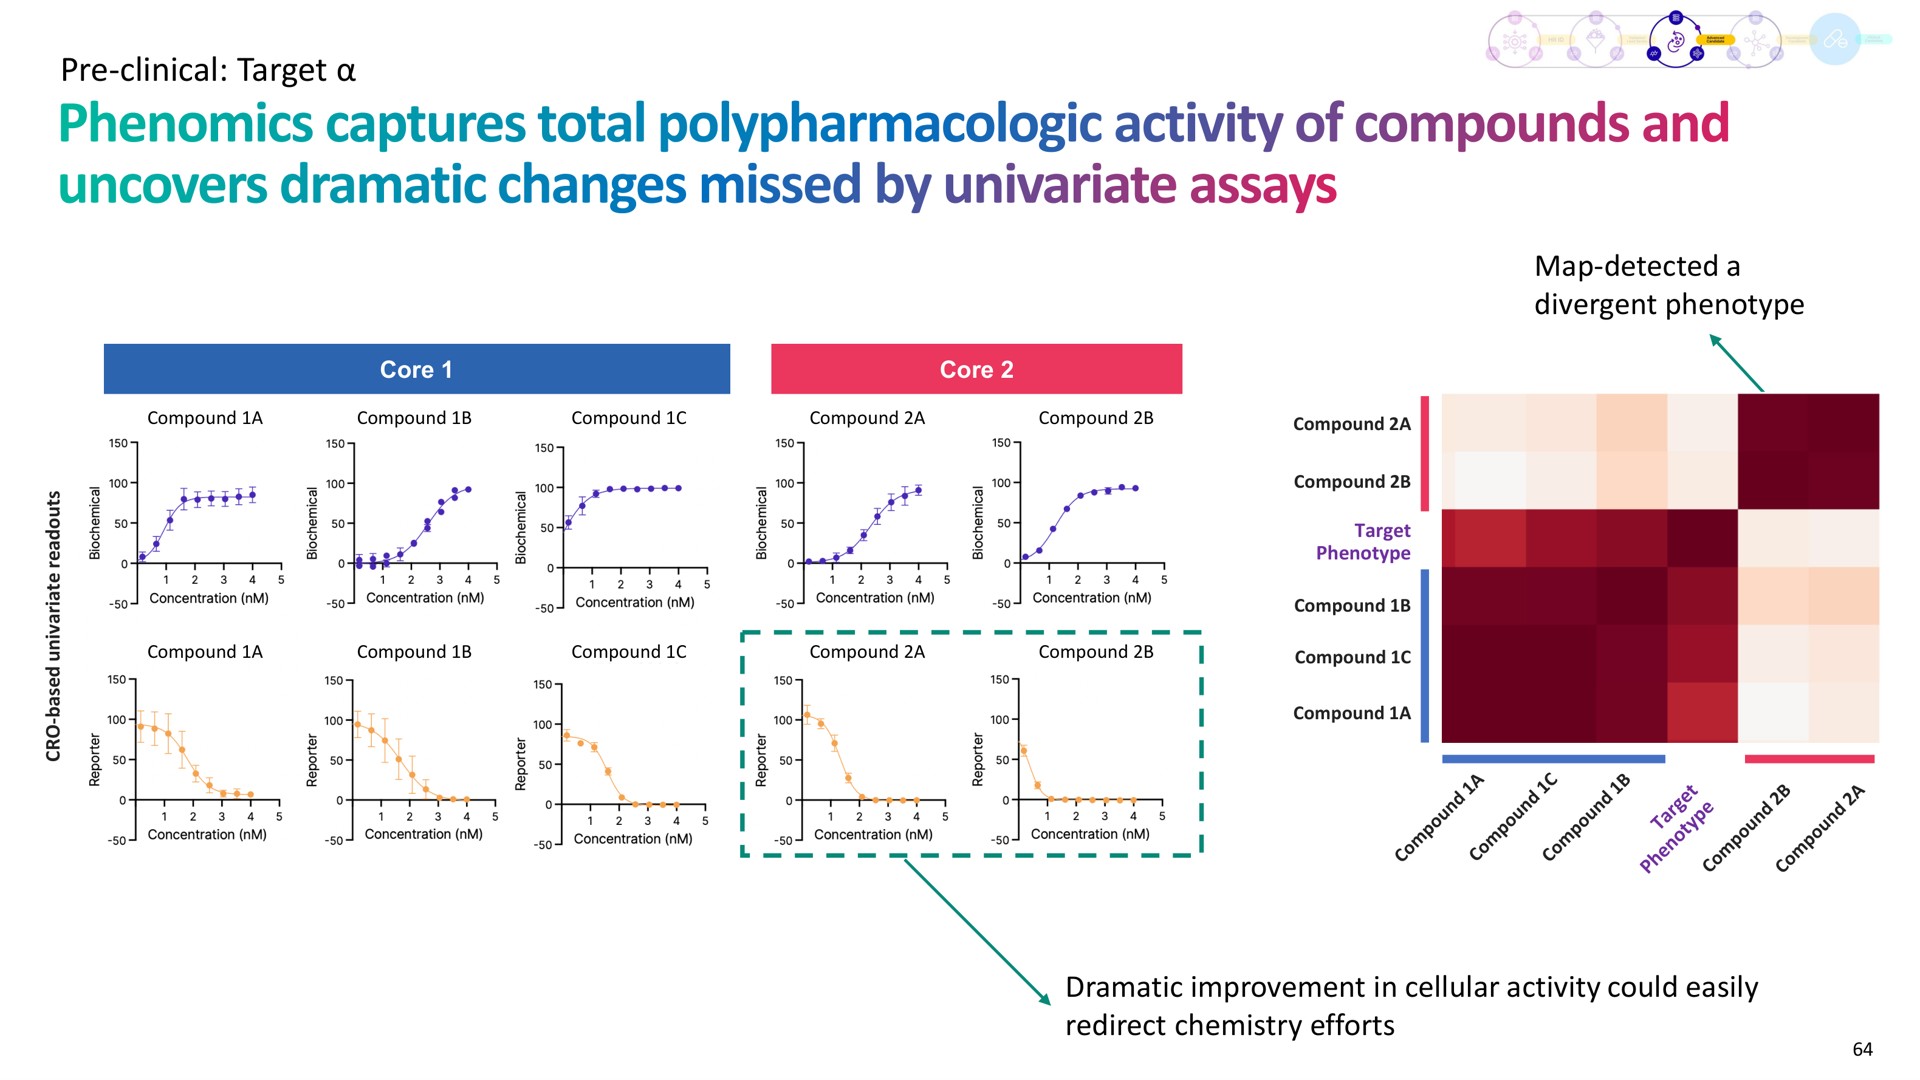 clinical target map detected a divergent phenotype dramatic improvement in cellular activity could easily redirect chemistry efforts captures total of compounds and uncovers changes missed by assays | Recursion Pharmaceuticals